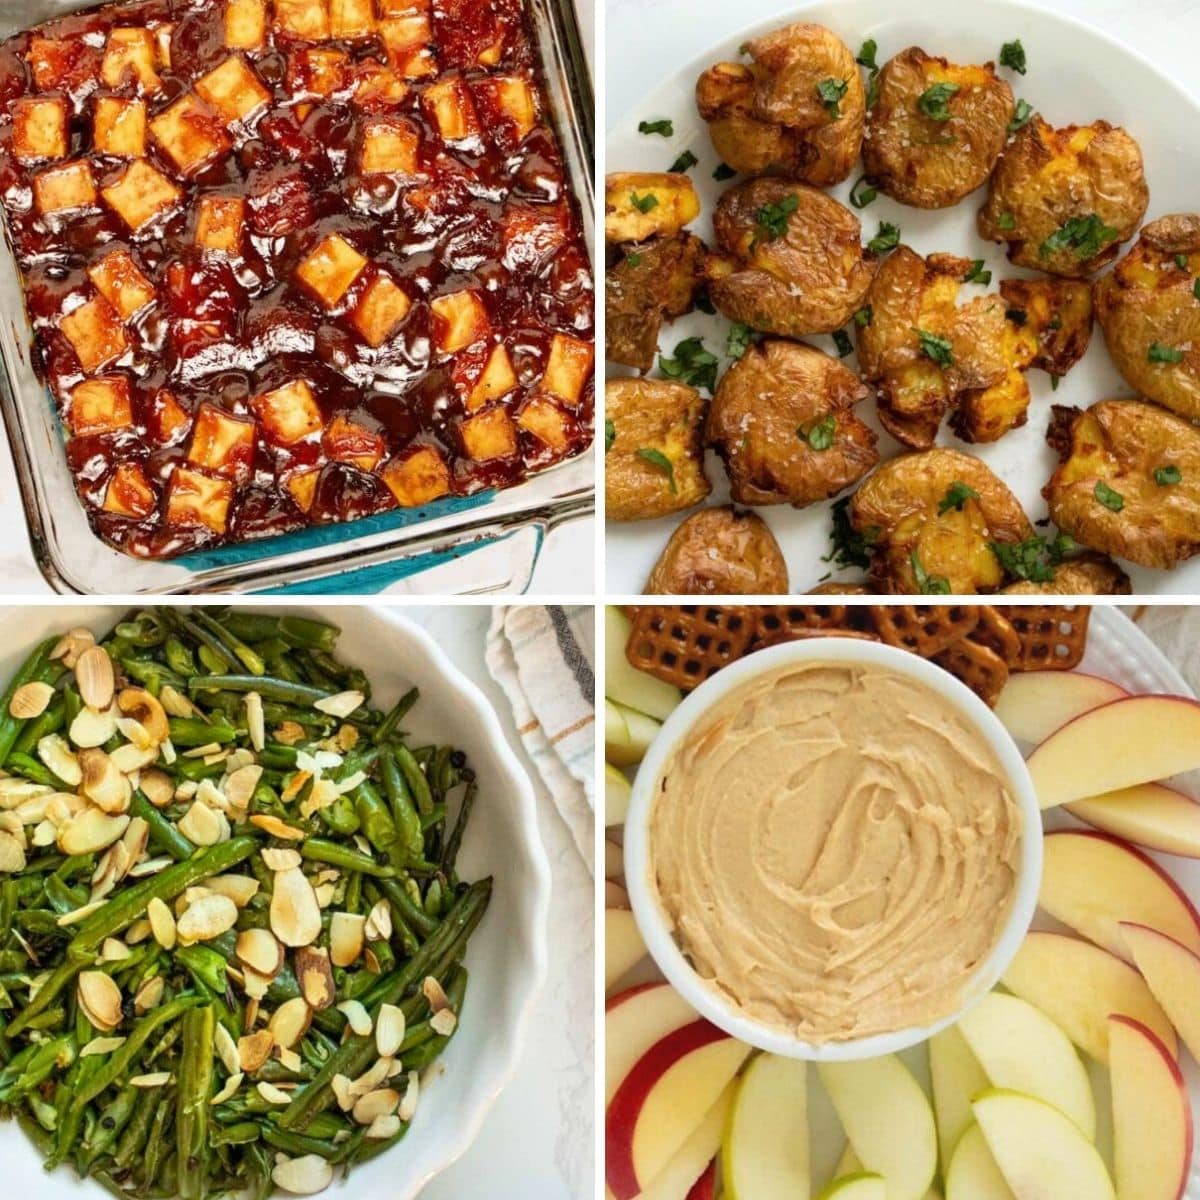 image collage showing some of the simple ingredients with 5 ingredients or less: BBQ tofu, smashed potatoes, green beans, PB dip